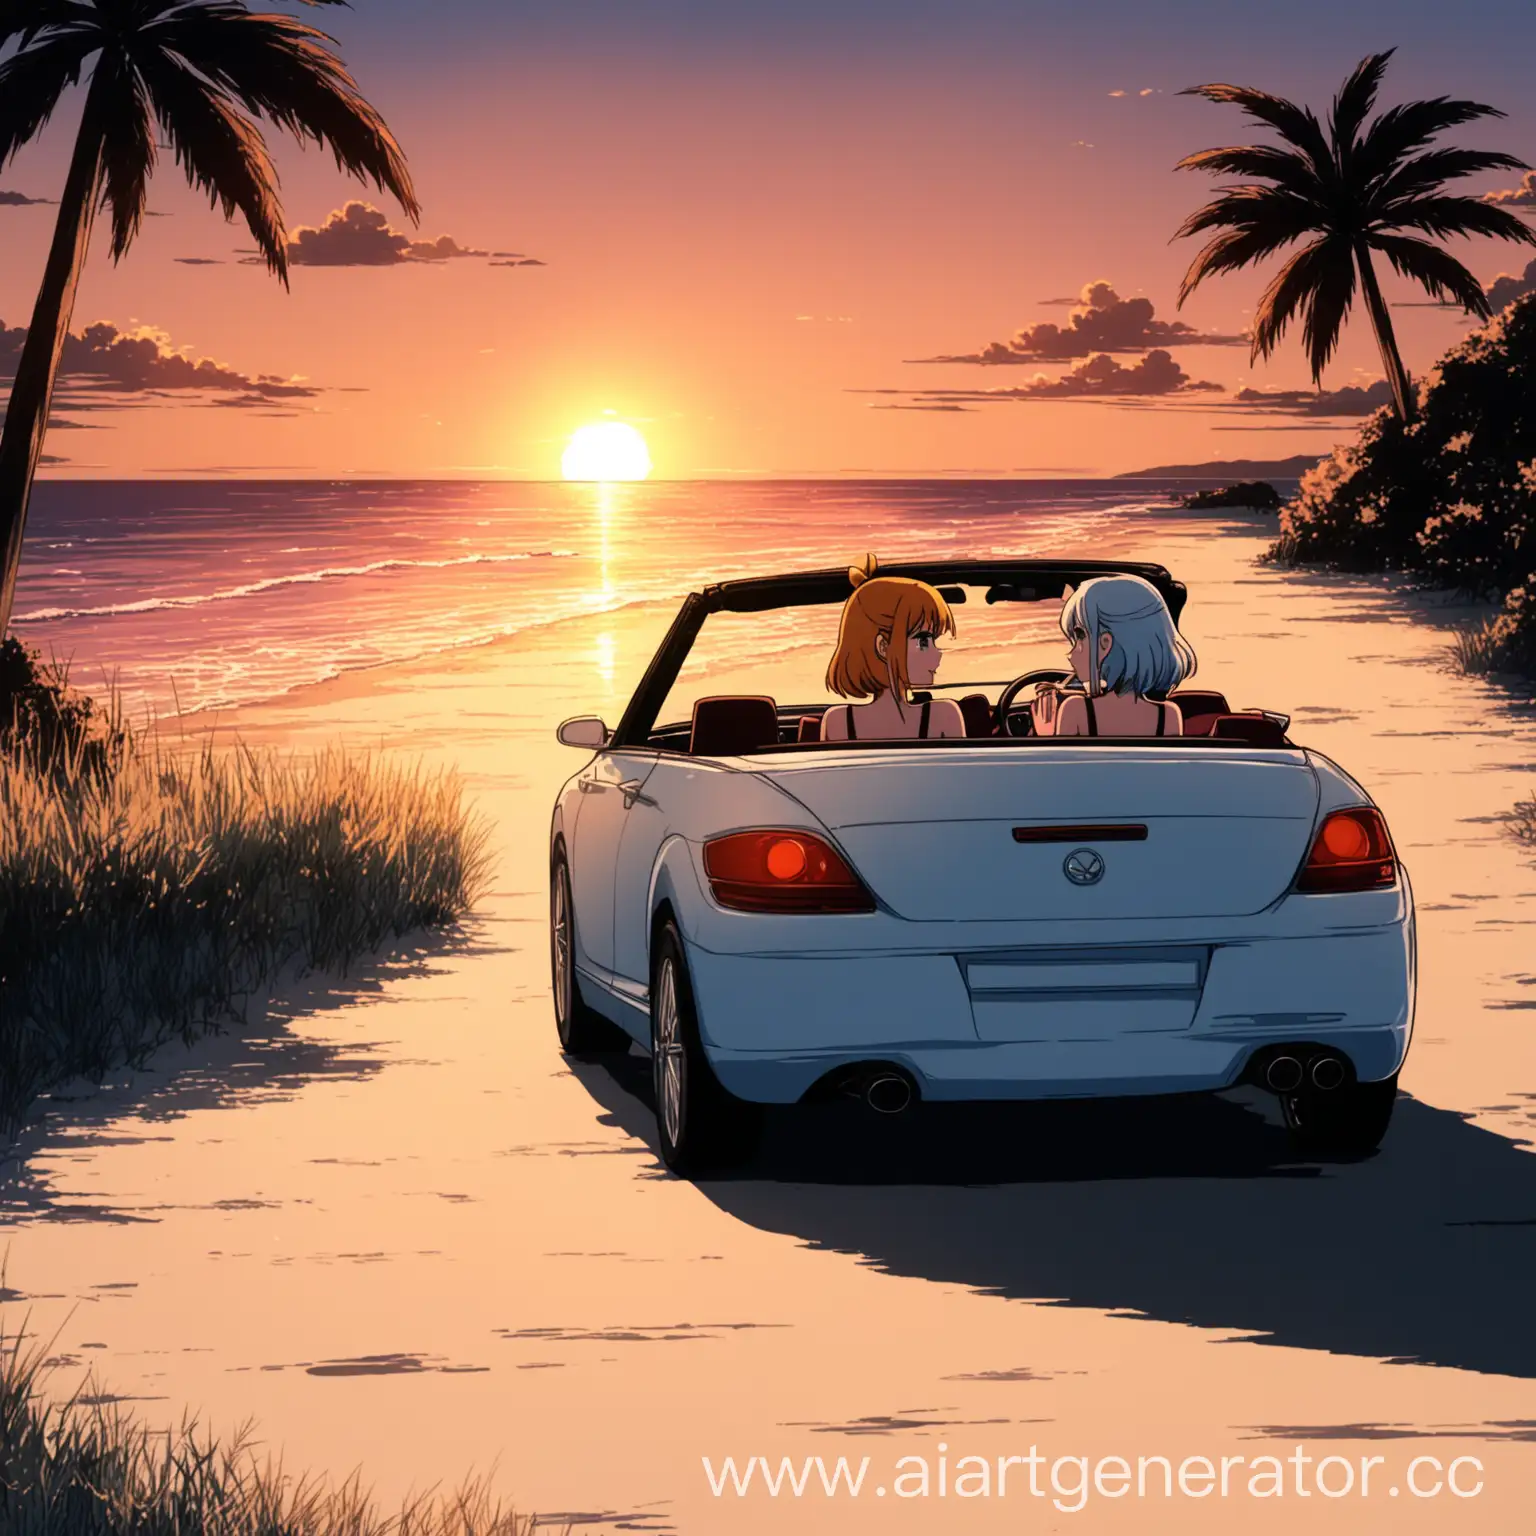 Anime-Style-Sunset-Drive-Two-Girls-Enjoying-a-Cabriolet-Beach-Ride